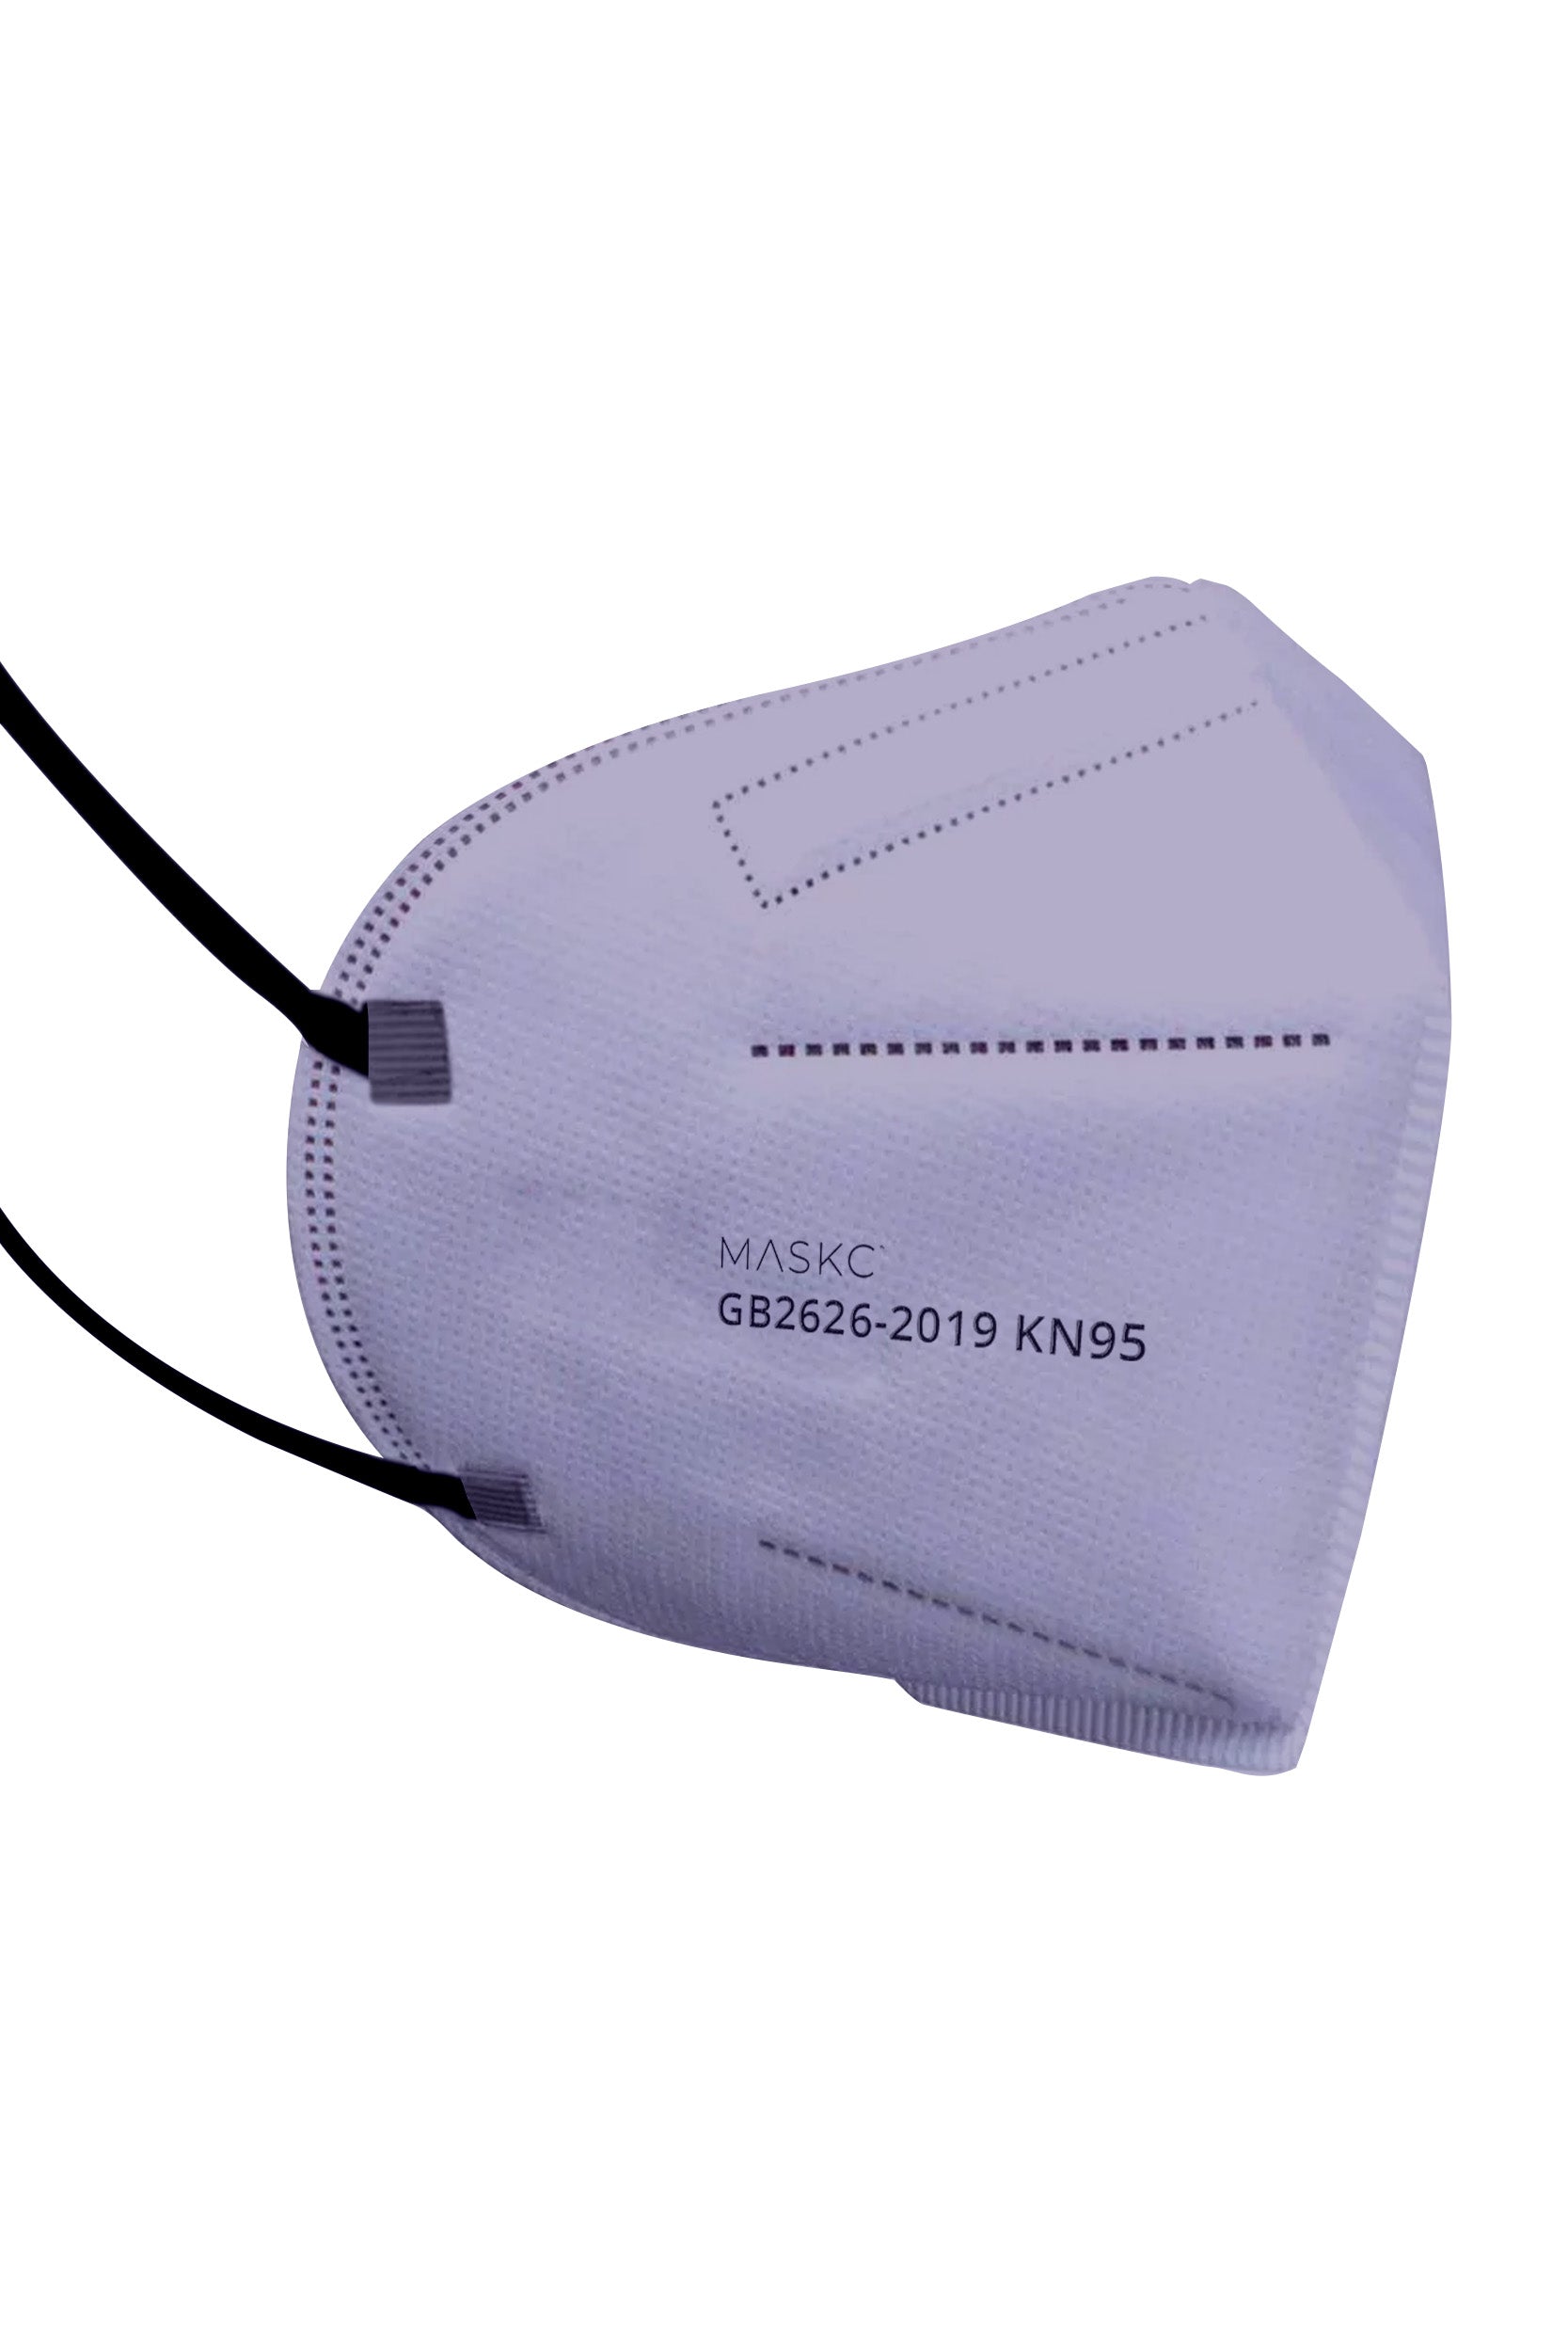 Stylish light purple KN95 face mask, with soft black ear loops and high quality fabric. 